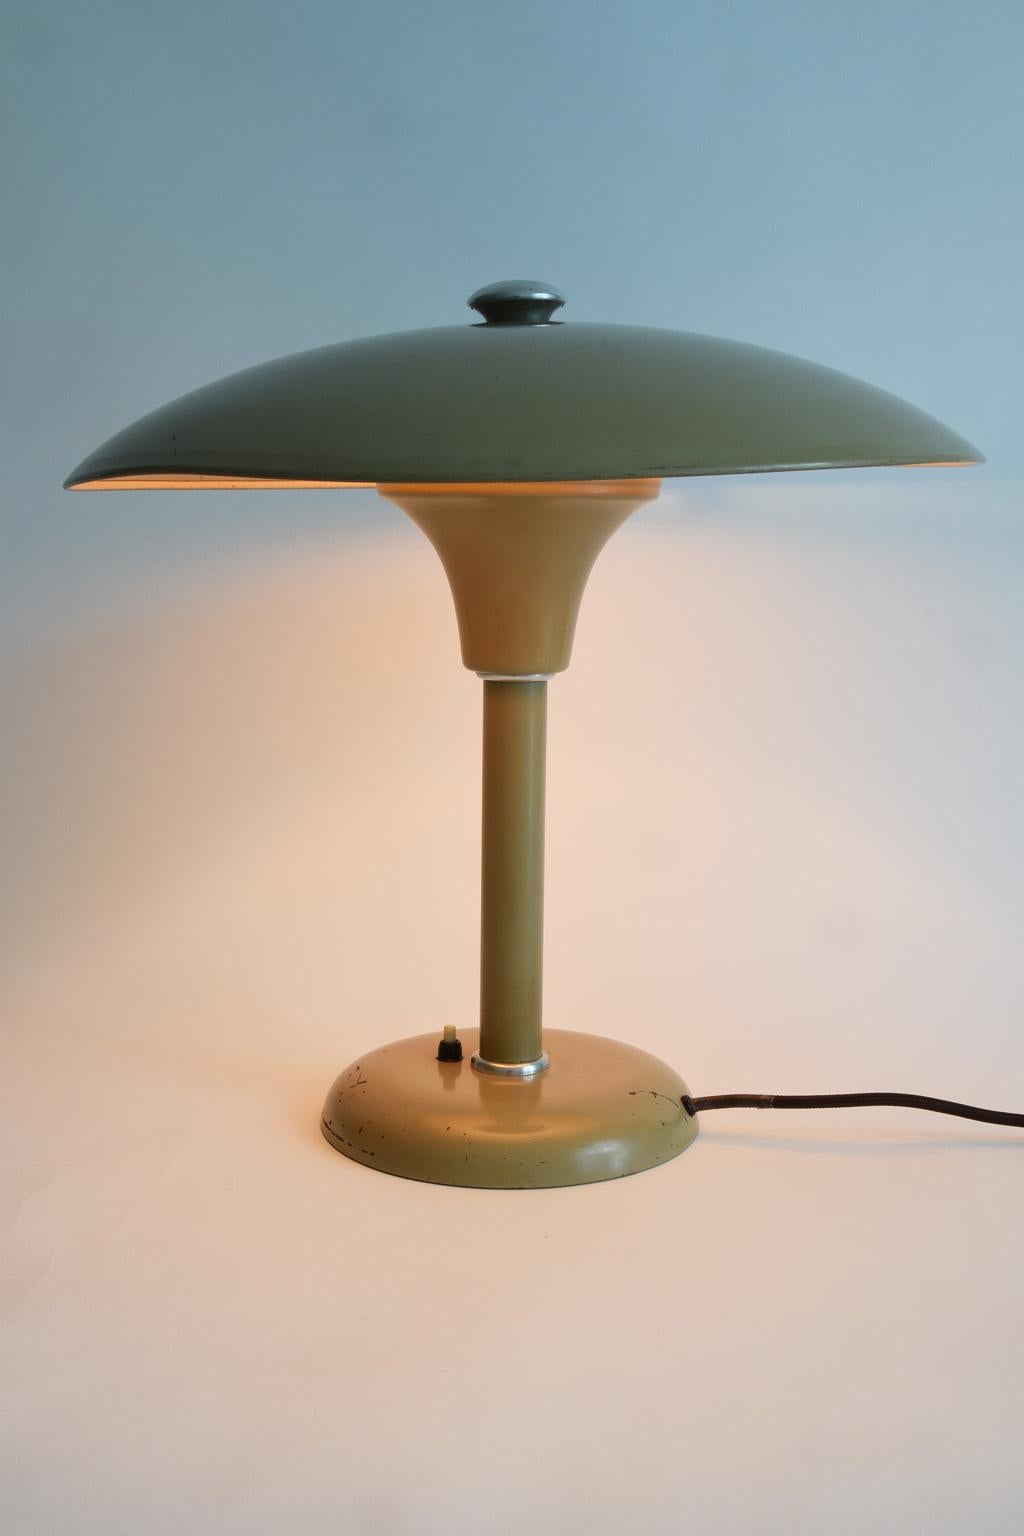 Mid-20th Century Table Lamp by Max Schumacher for Werner Schröder Bauhaus, Germany, 1934 For Sale